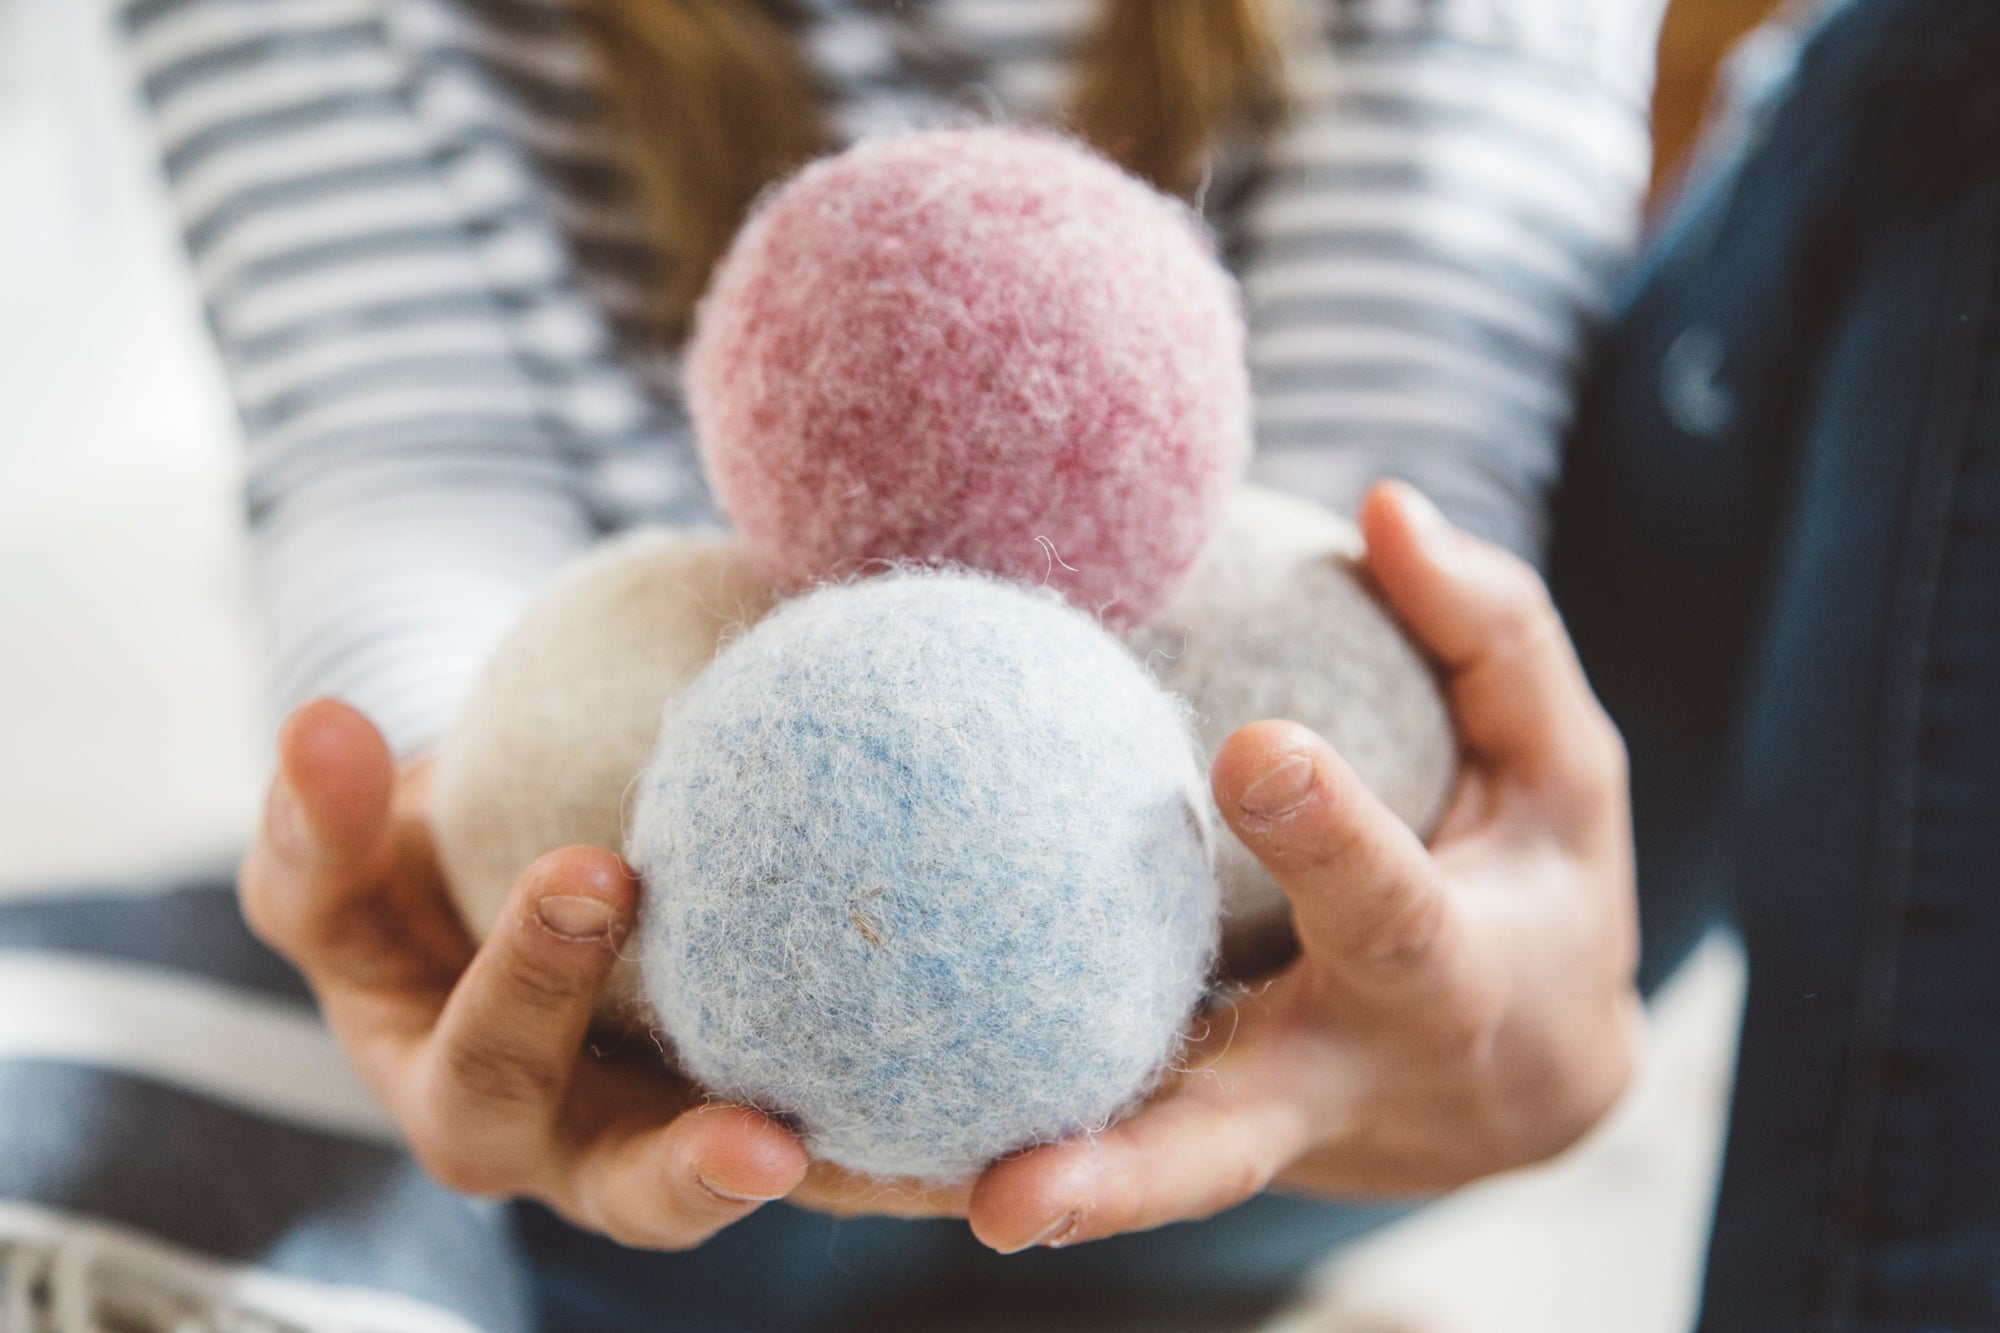 Dryer Balls: How to choose the best brand?